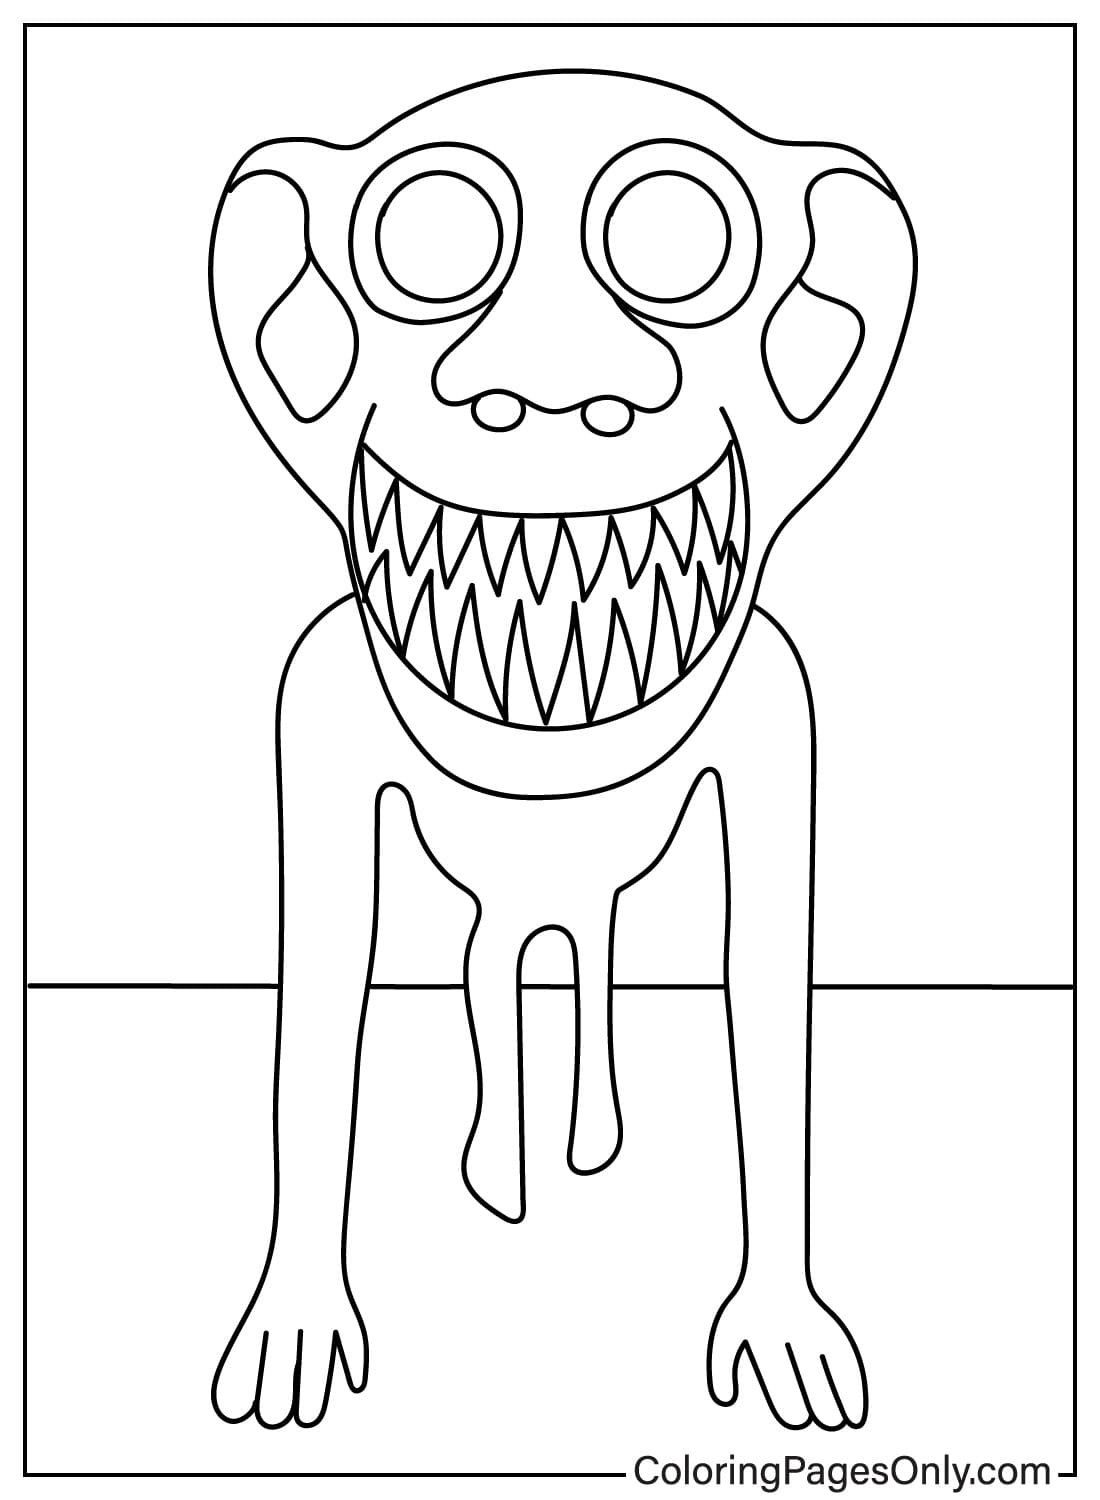 Zoonomaly Coloring Sheet for Preschoolers from Zoonomaly